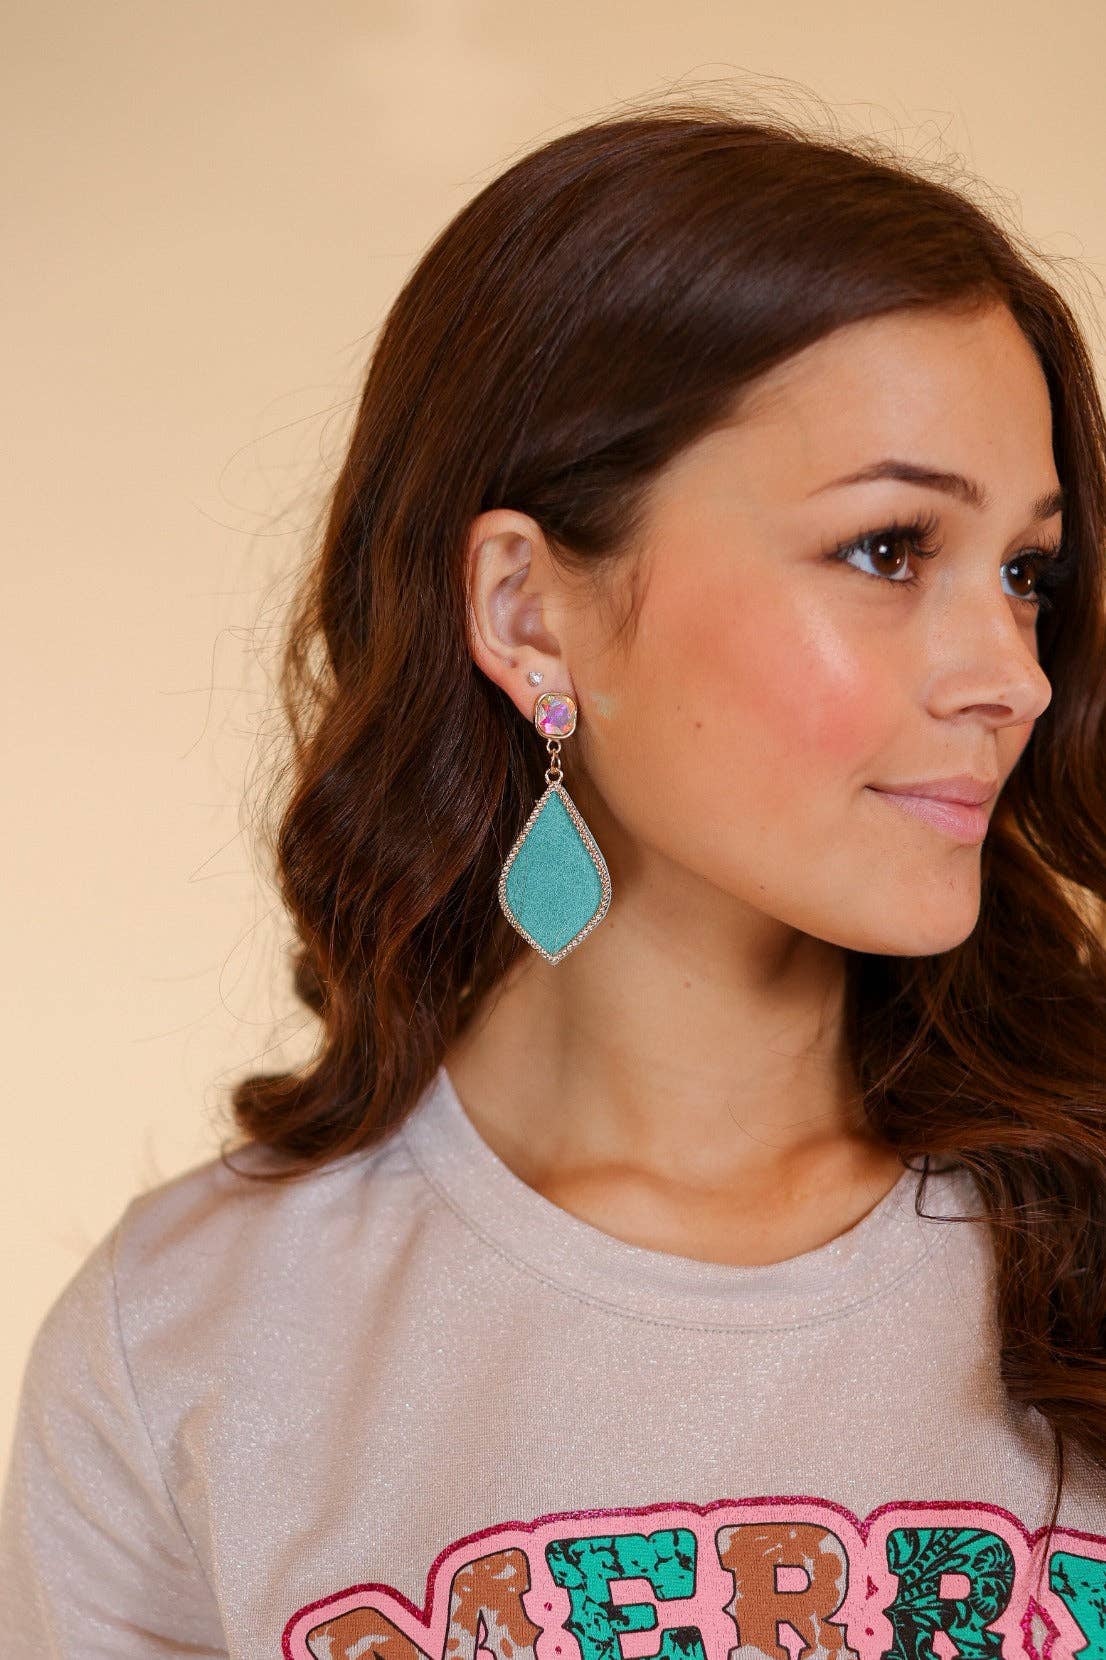 Too Strong to be Dainty Teardrop Earrings with Gold Casing, Turquoise